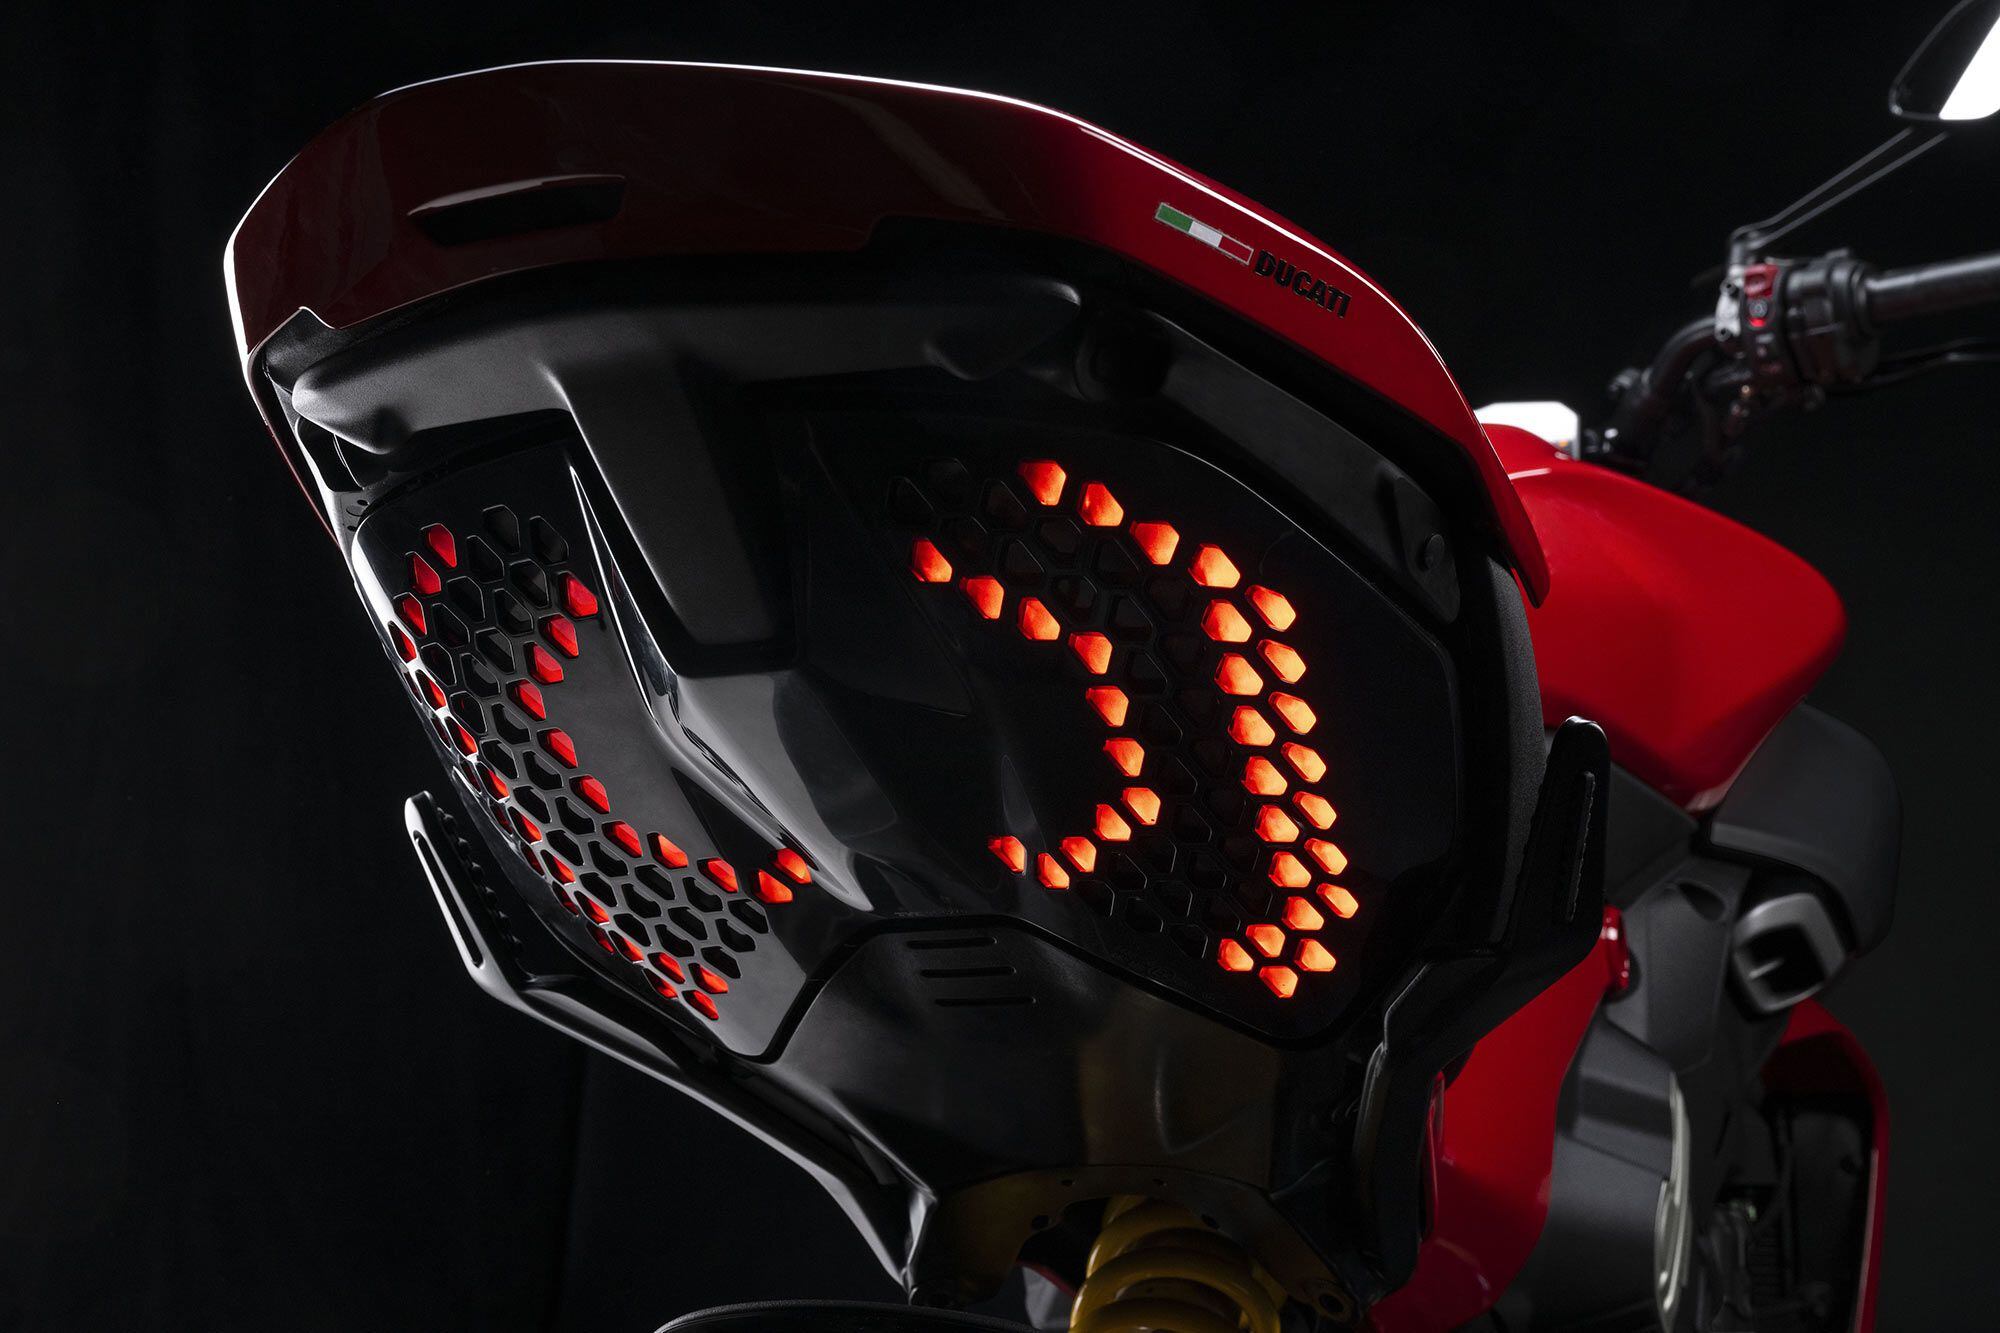 An assortment of LED lights under the tail give the Diavel V4 an unmistakable look.